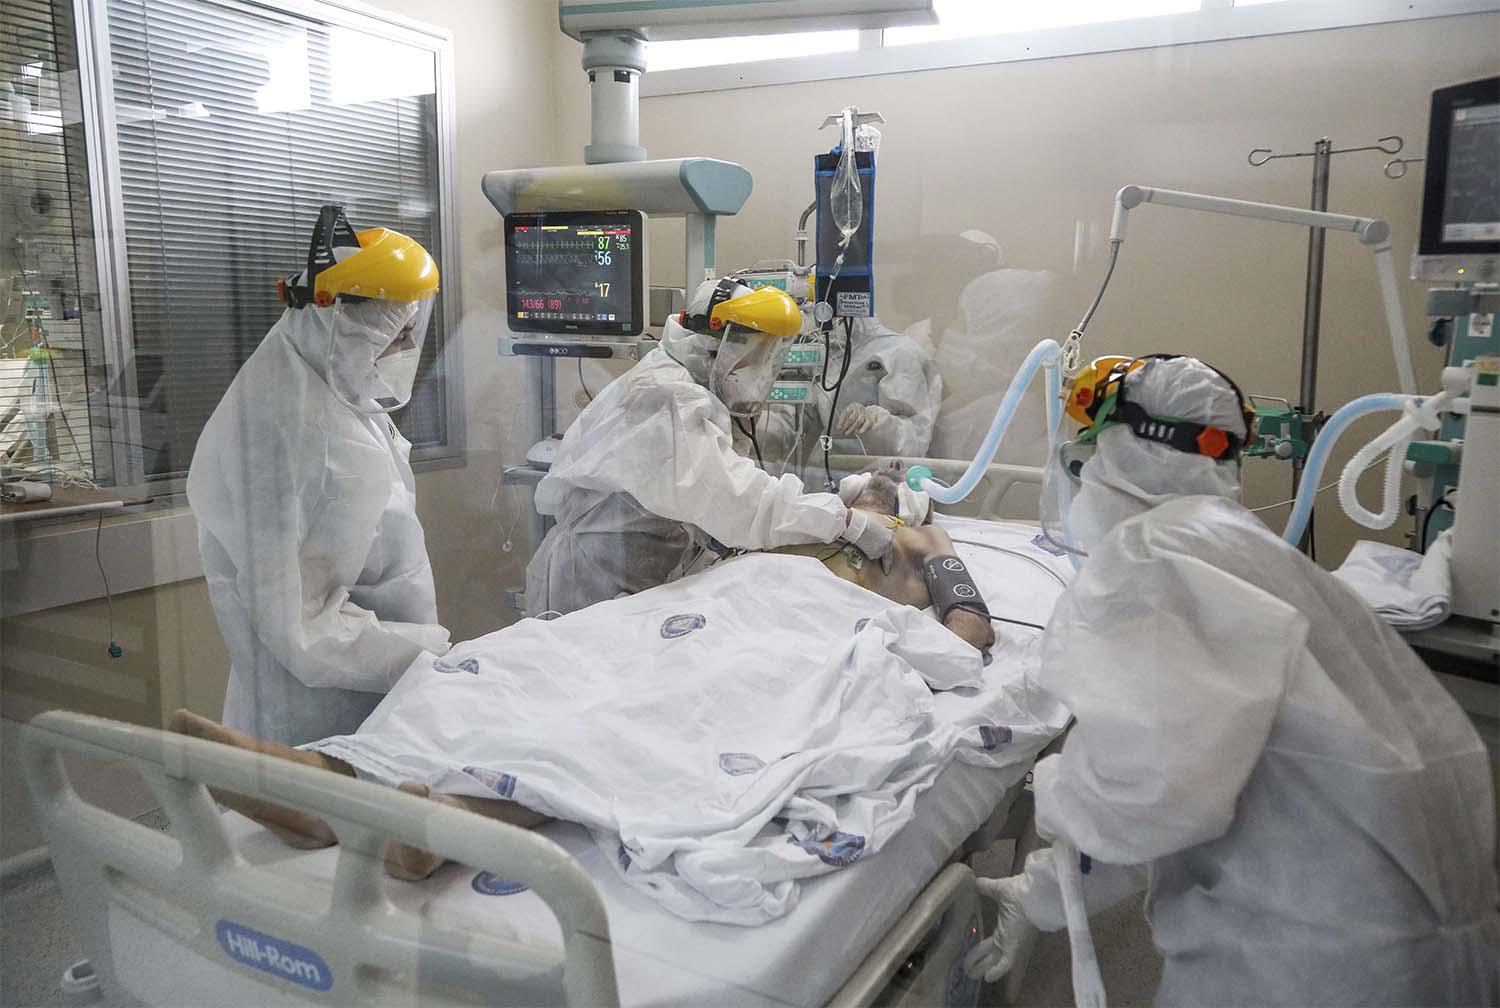 Healthcare workers tend to a patient at one of the intensive care units for COVID-19 patients (ICU) of the Akdeniz University hospital in Antalya